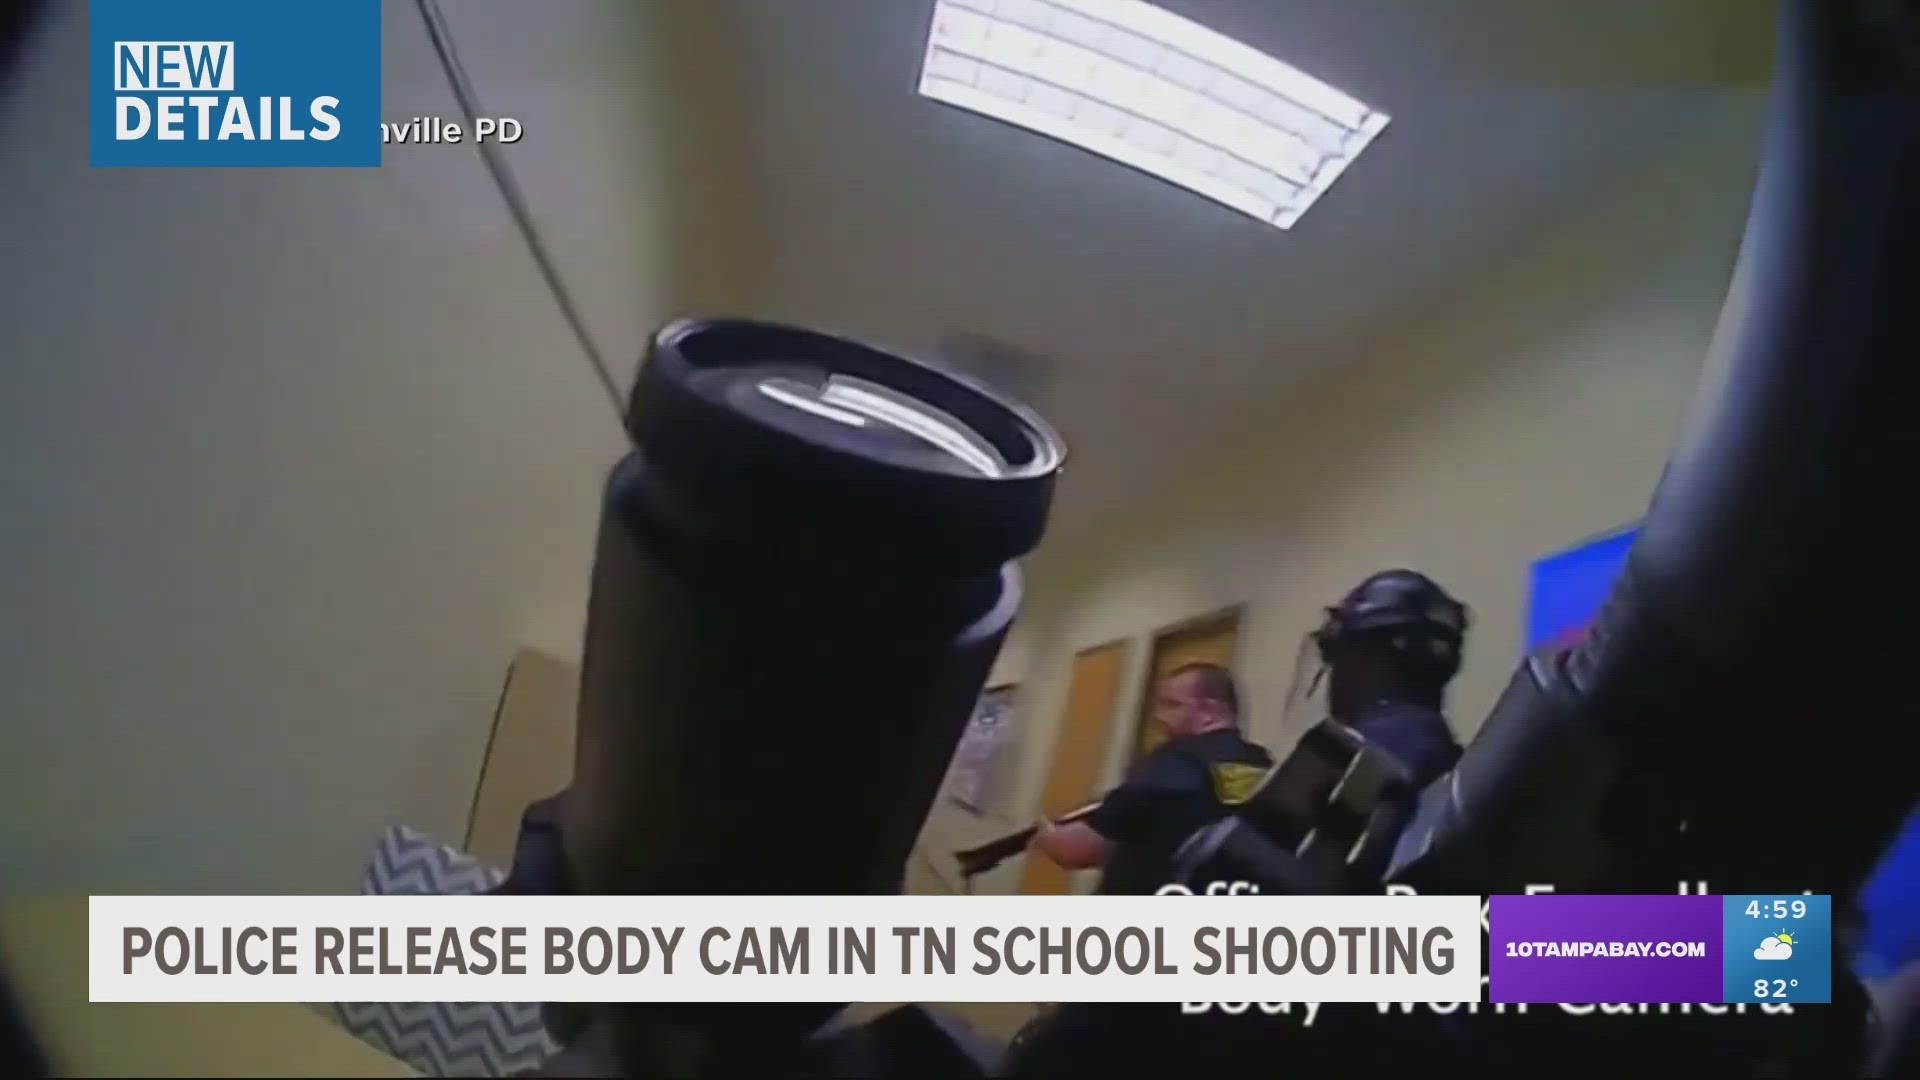 The body camera video is extremely graphic and shows officers confronting the shooter inside a Nashville elementary school.